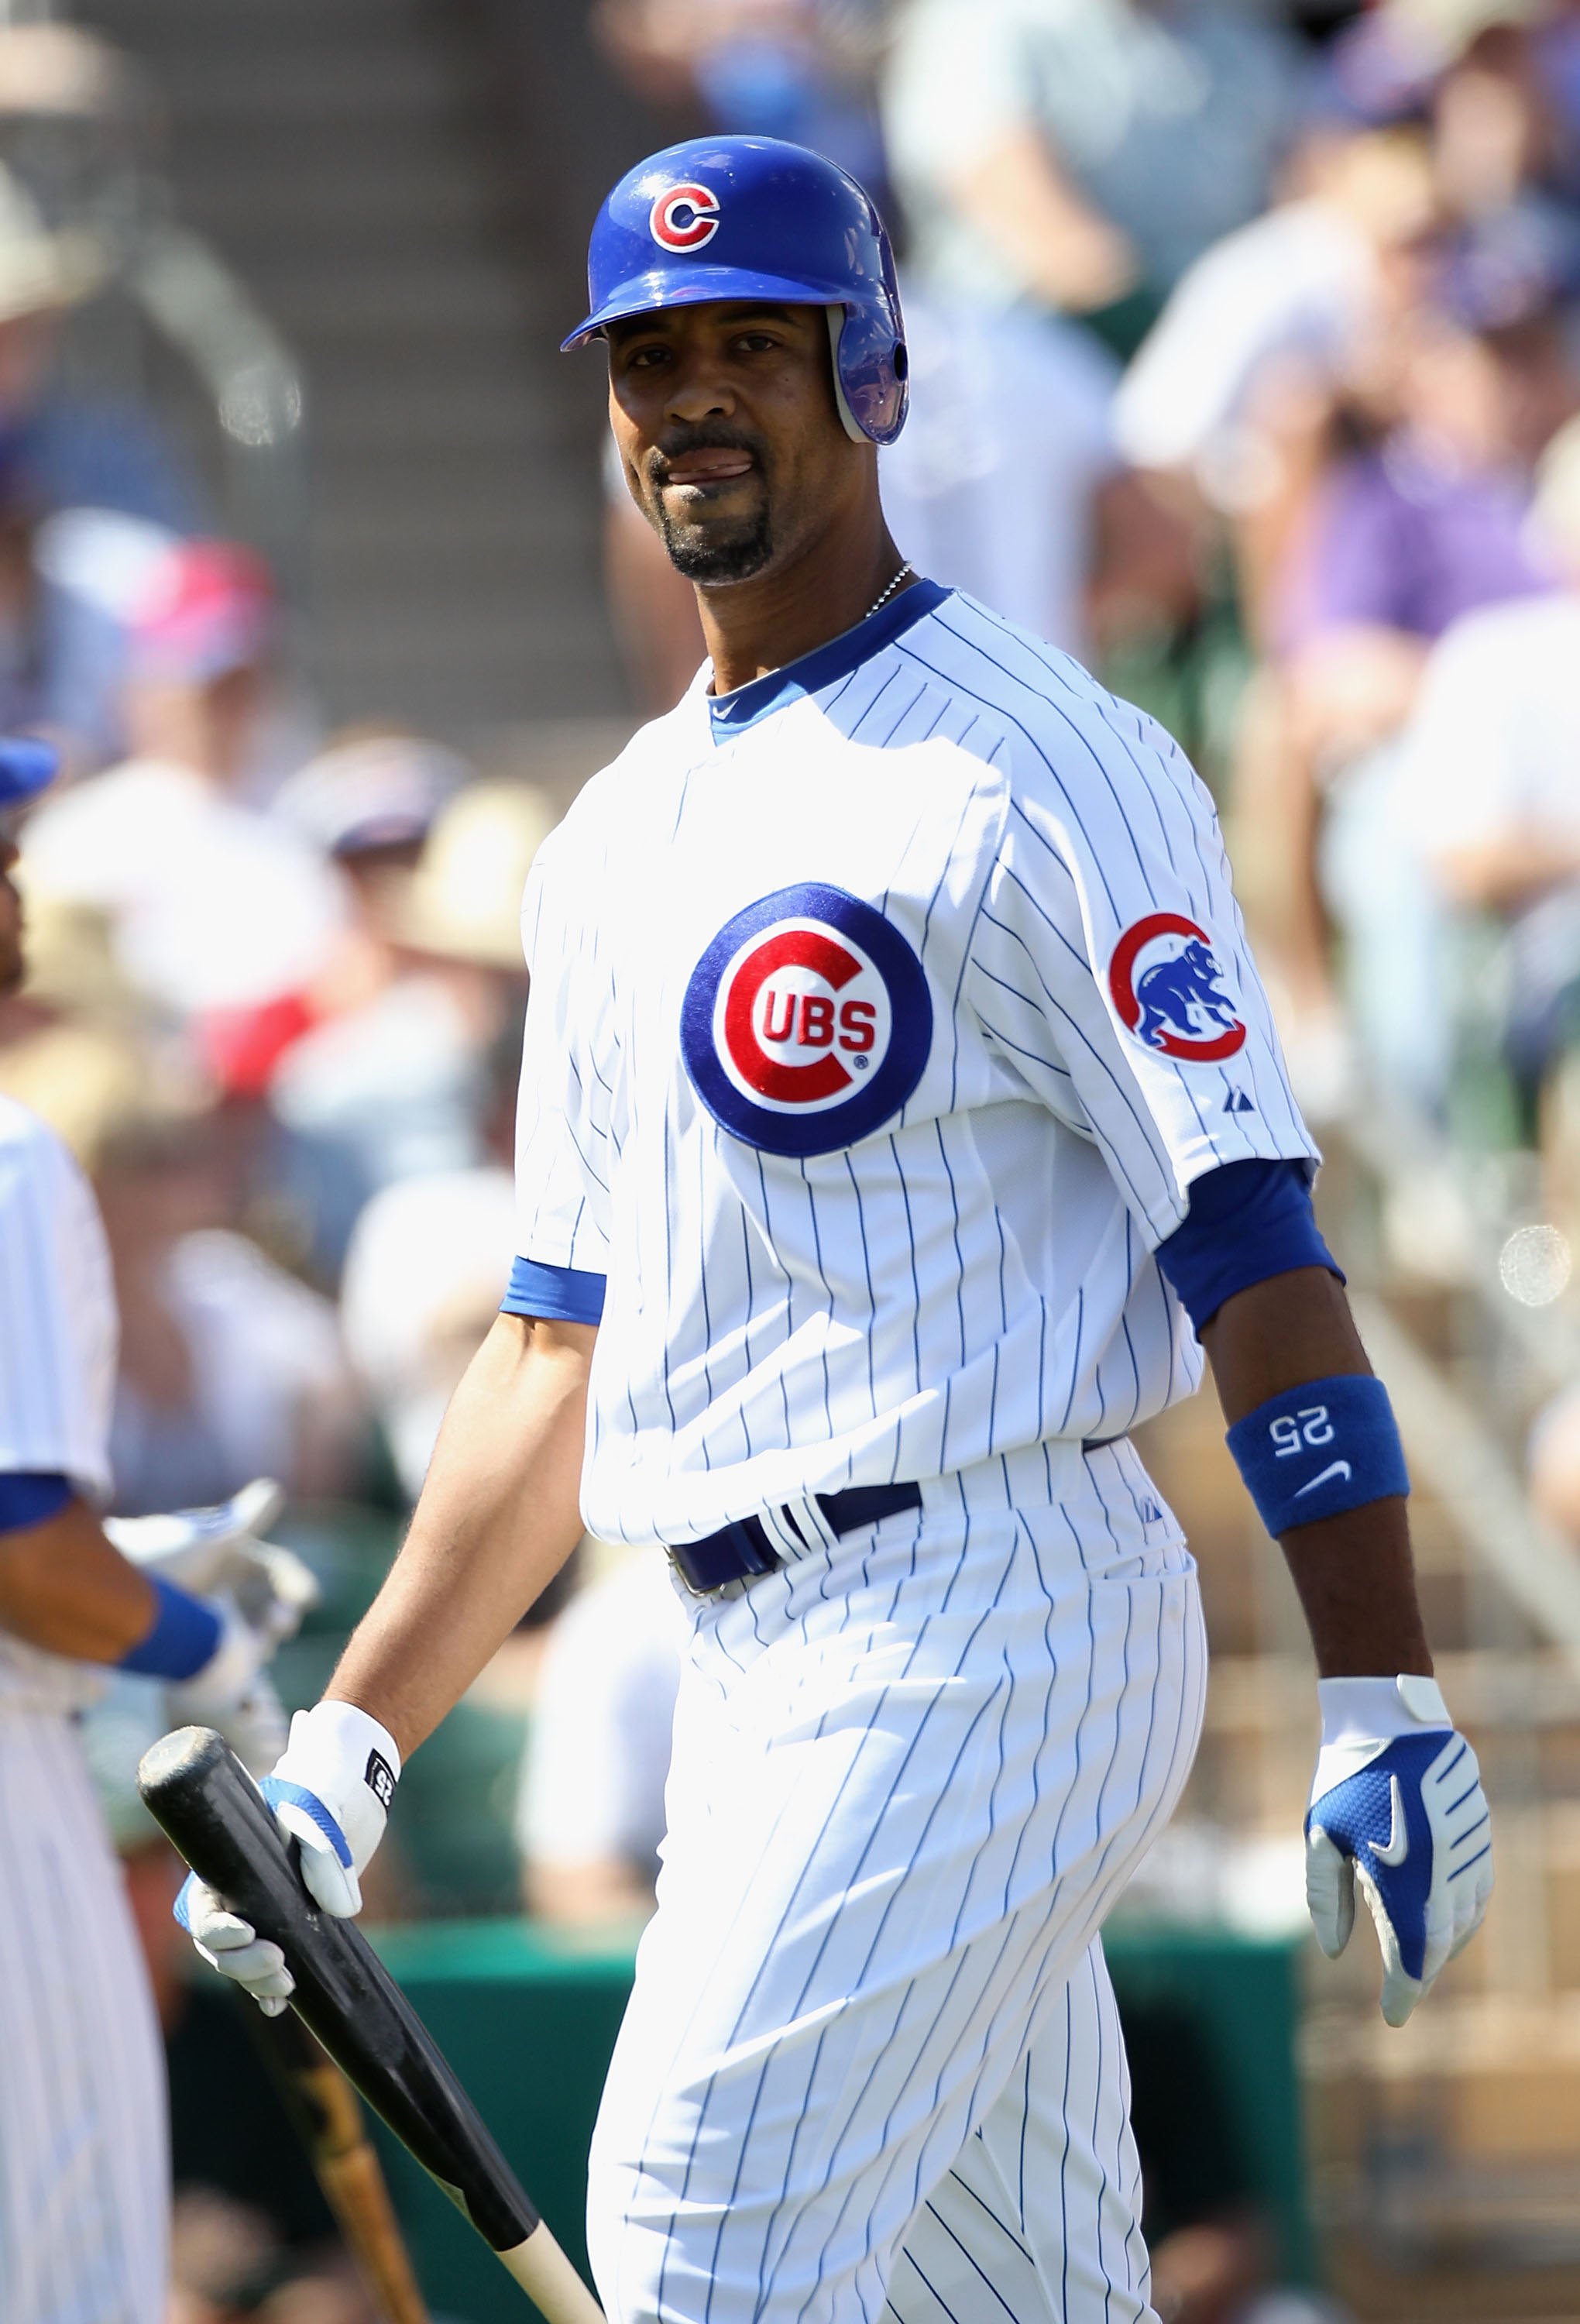 MESA, AZ - MARCH 04:  Derrek Lee #25 of the Chicago Cubs walks to the dugout during the MLB spring training game against the Oakland Athletics at HoHoKam Park on March 4, 2009 in Mesa, Arizona.  The Cubs defeated the A's 9-3.  (Photo by Christian Petersen